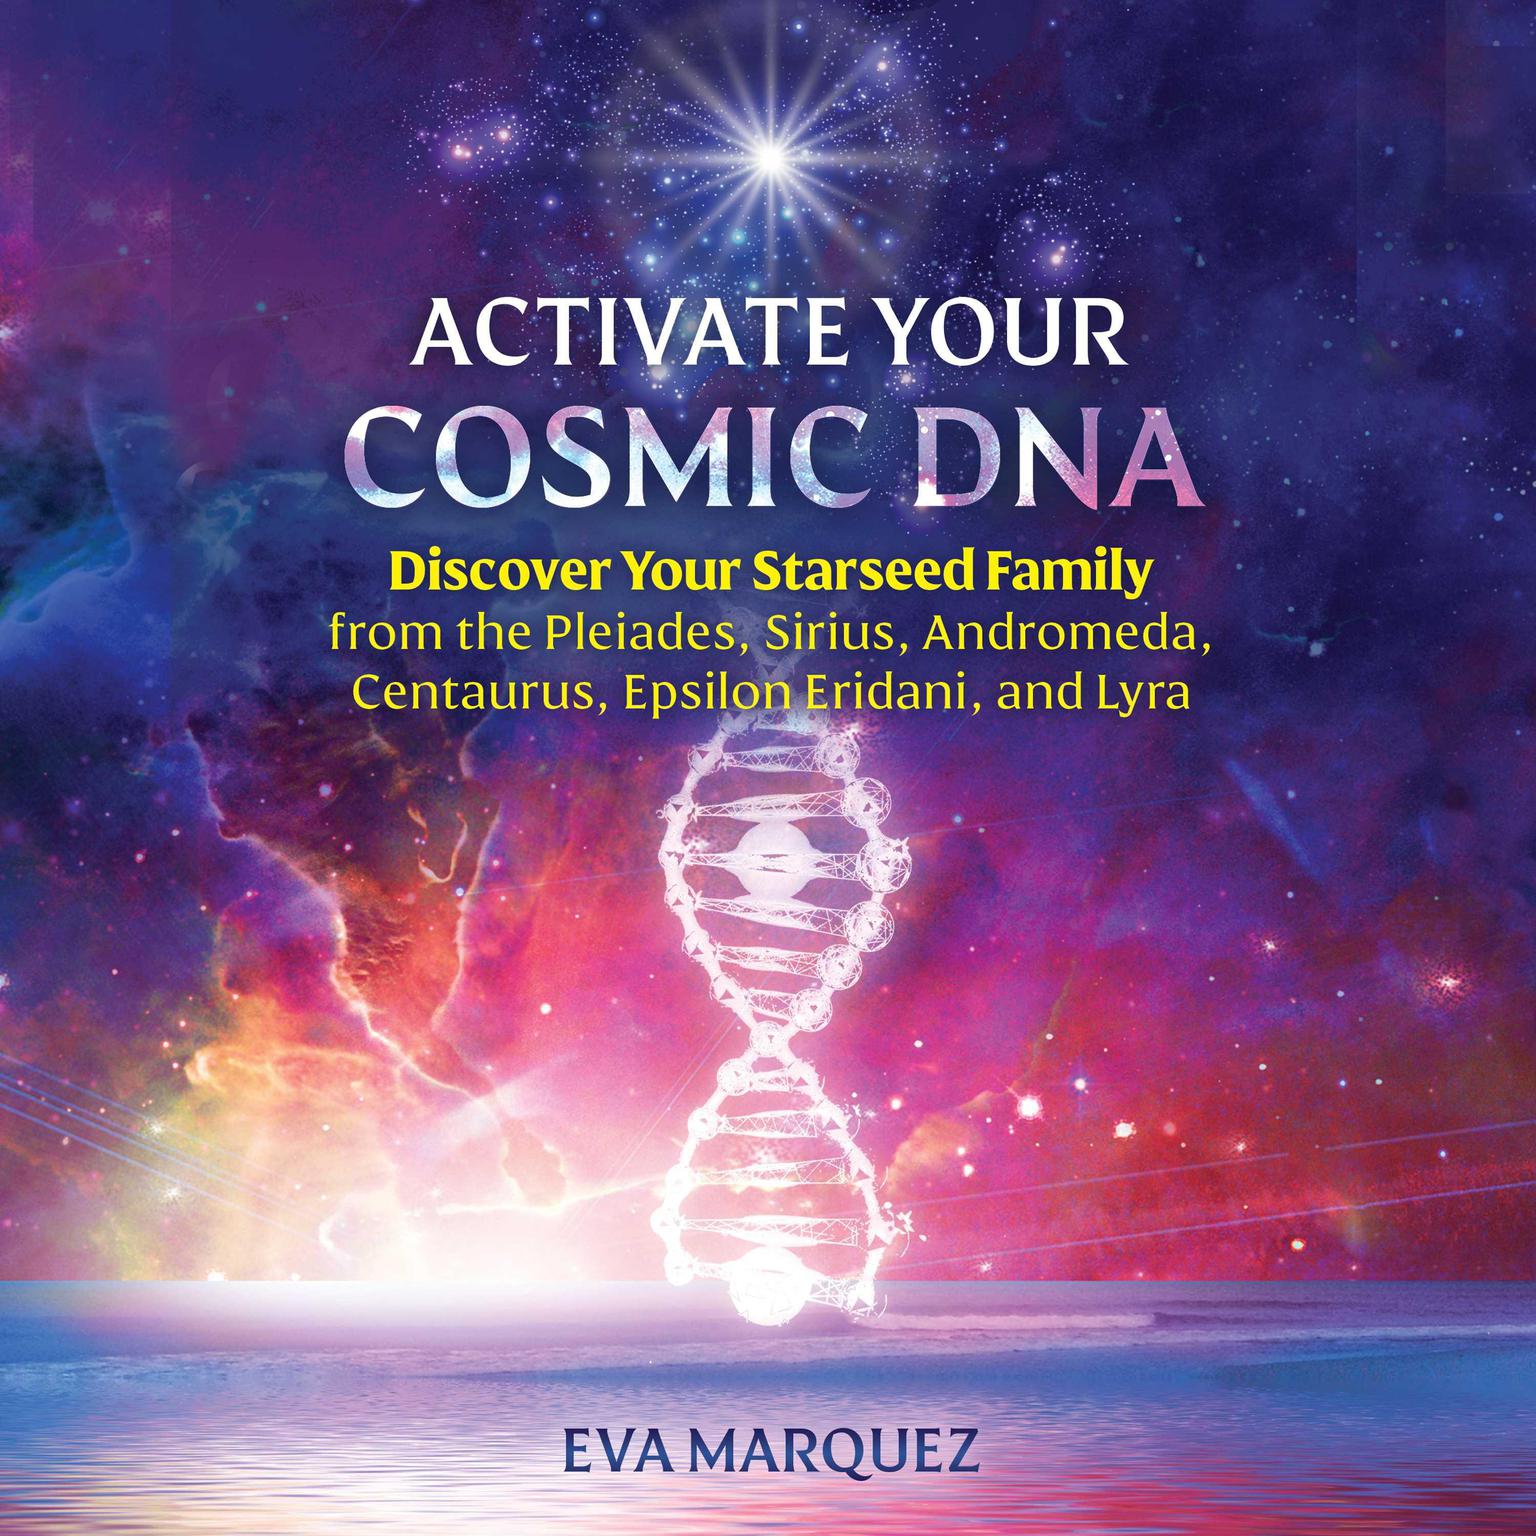 Activate Your Cosmic DNA: Discover Your Starseed Family from the Pleiades, Sirius, Andromeda, Centaurus, Epsilon Eridani, and Lyra Audiobook, by Eva Marquez